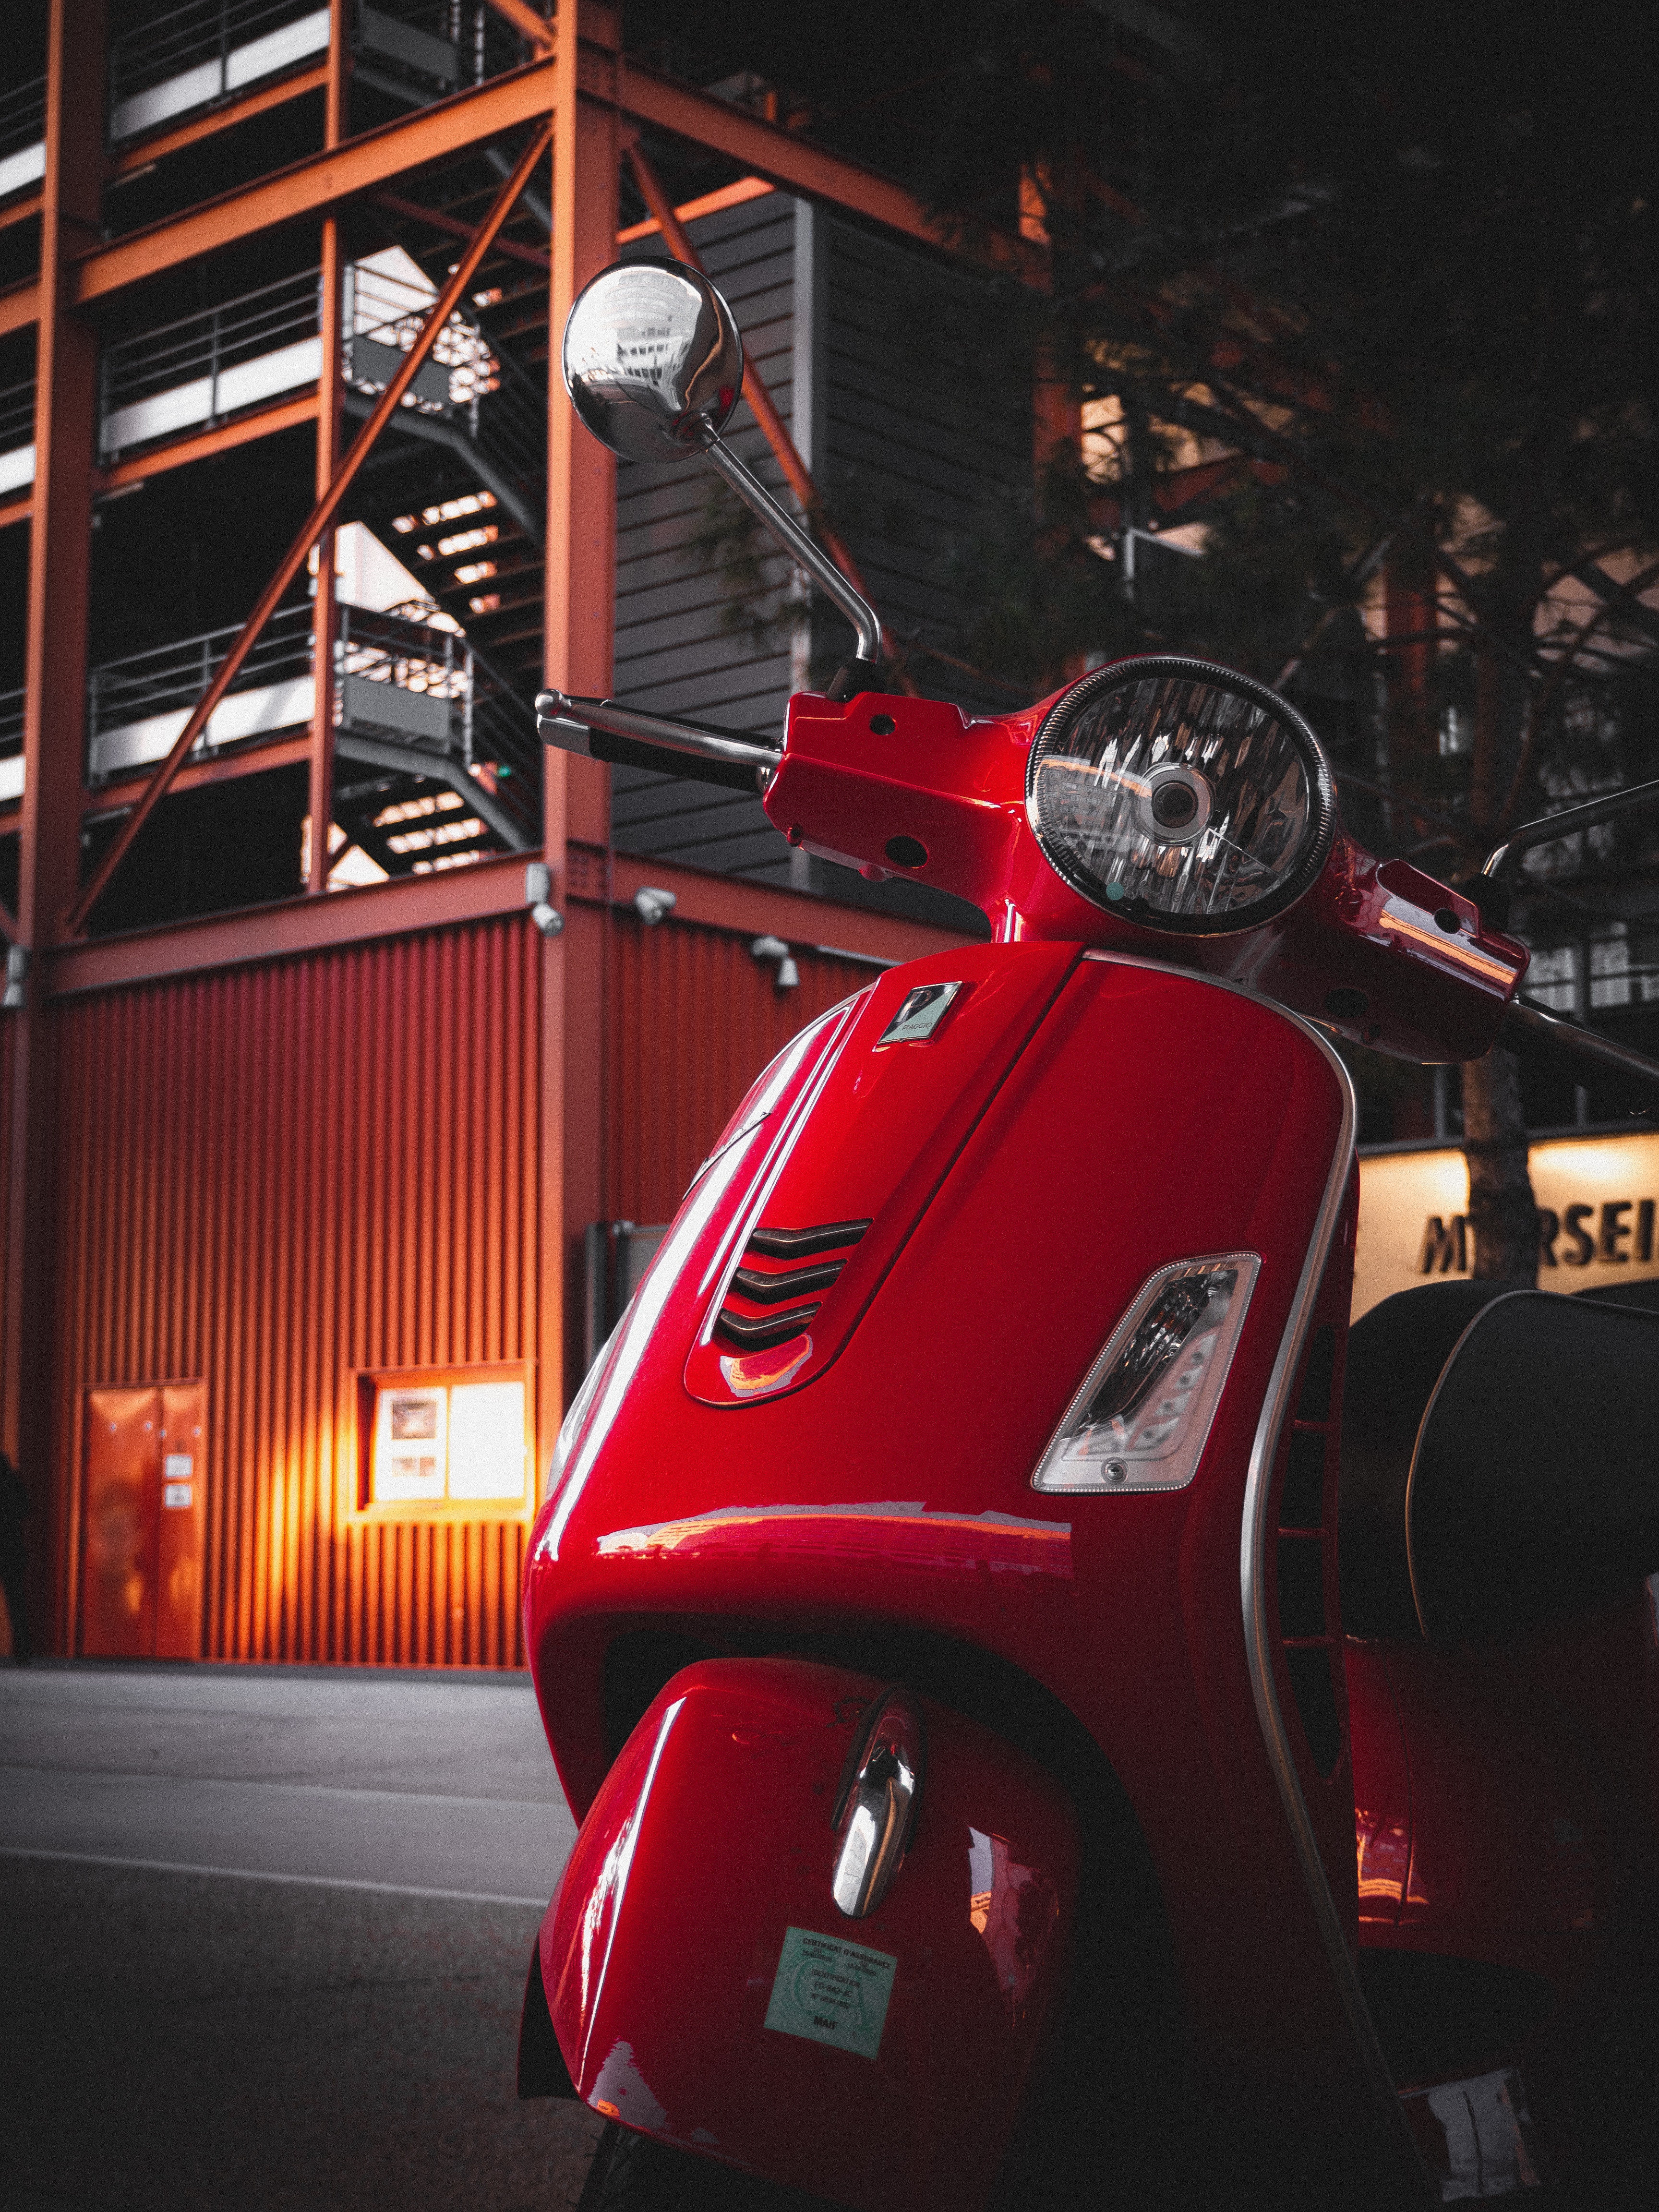 desktop and mobile rudder, motorcycles, red, headlight